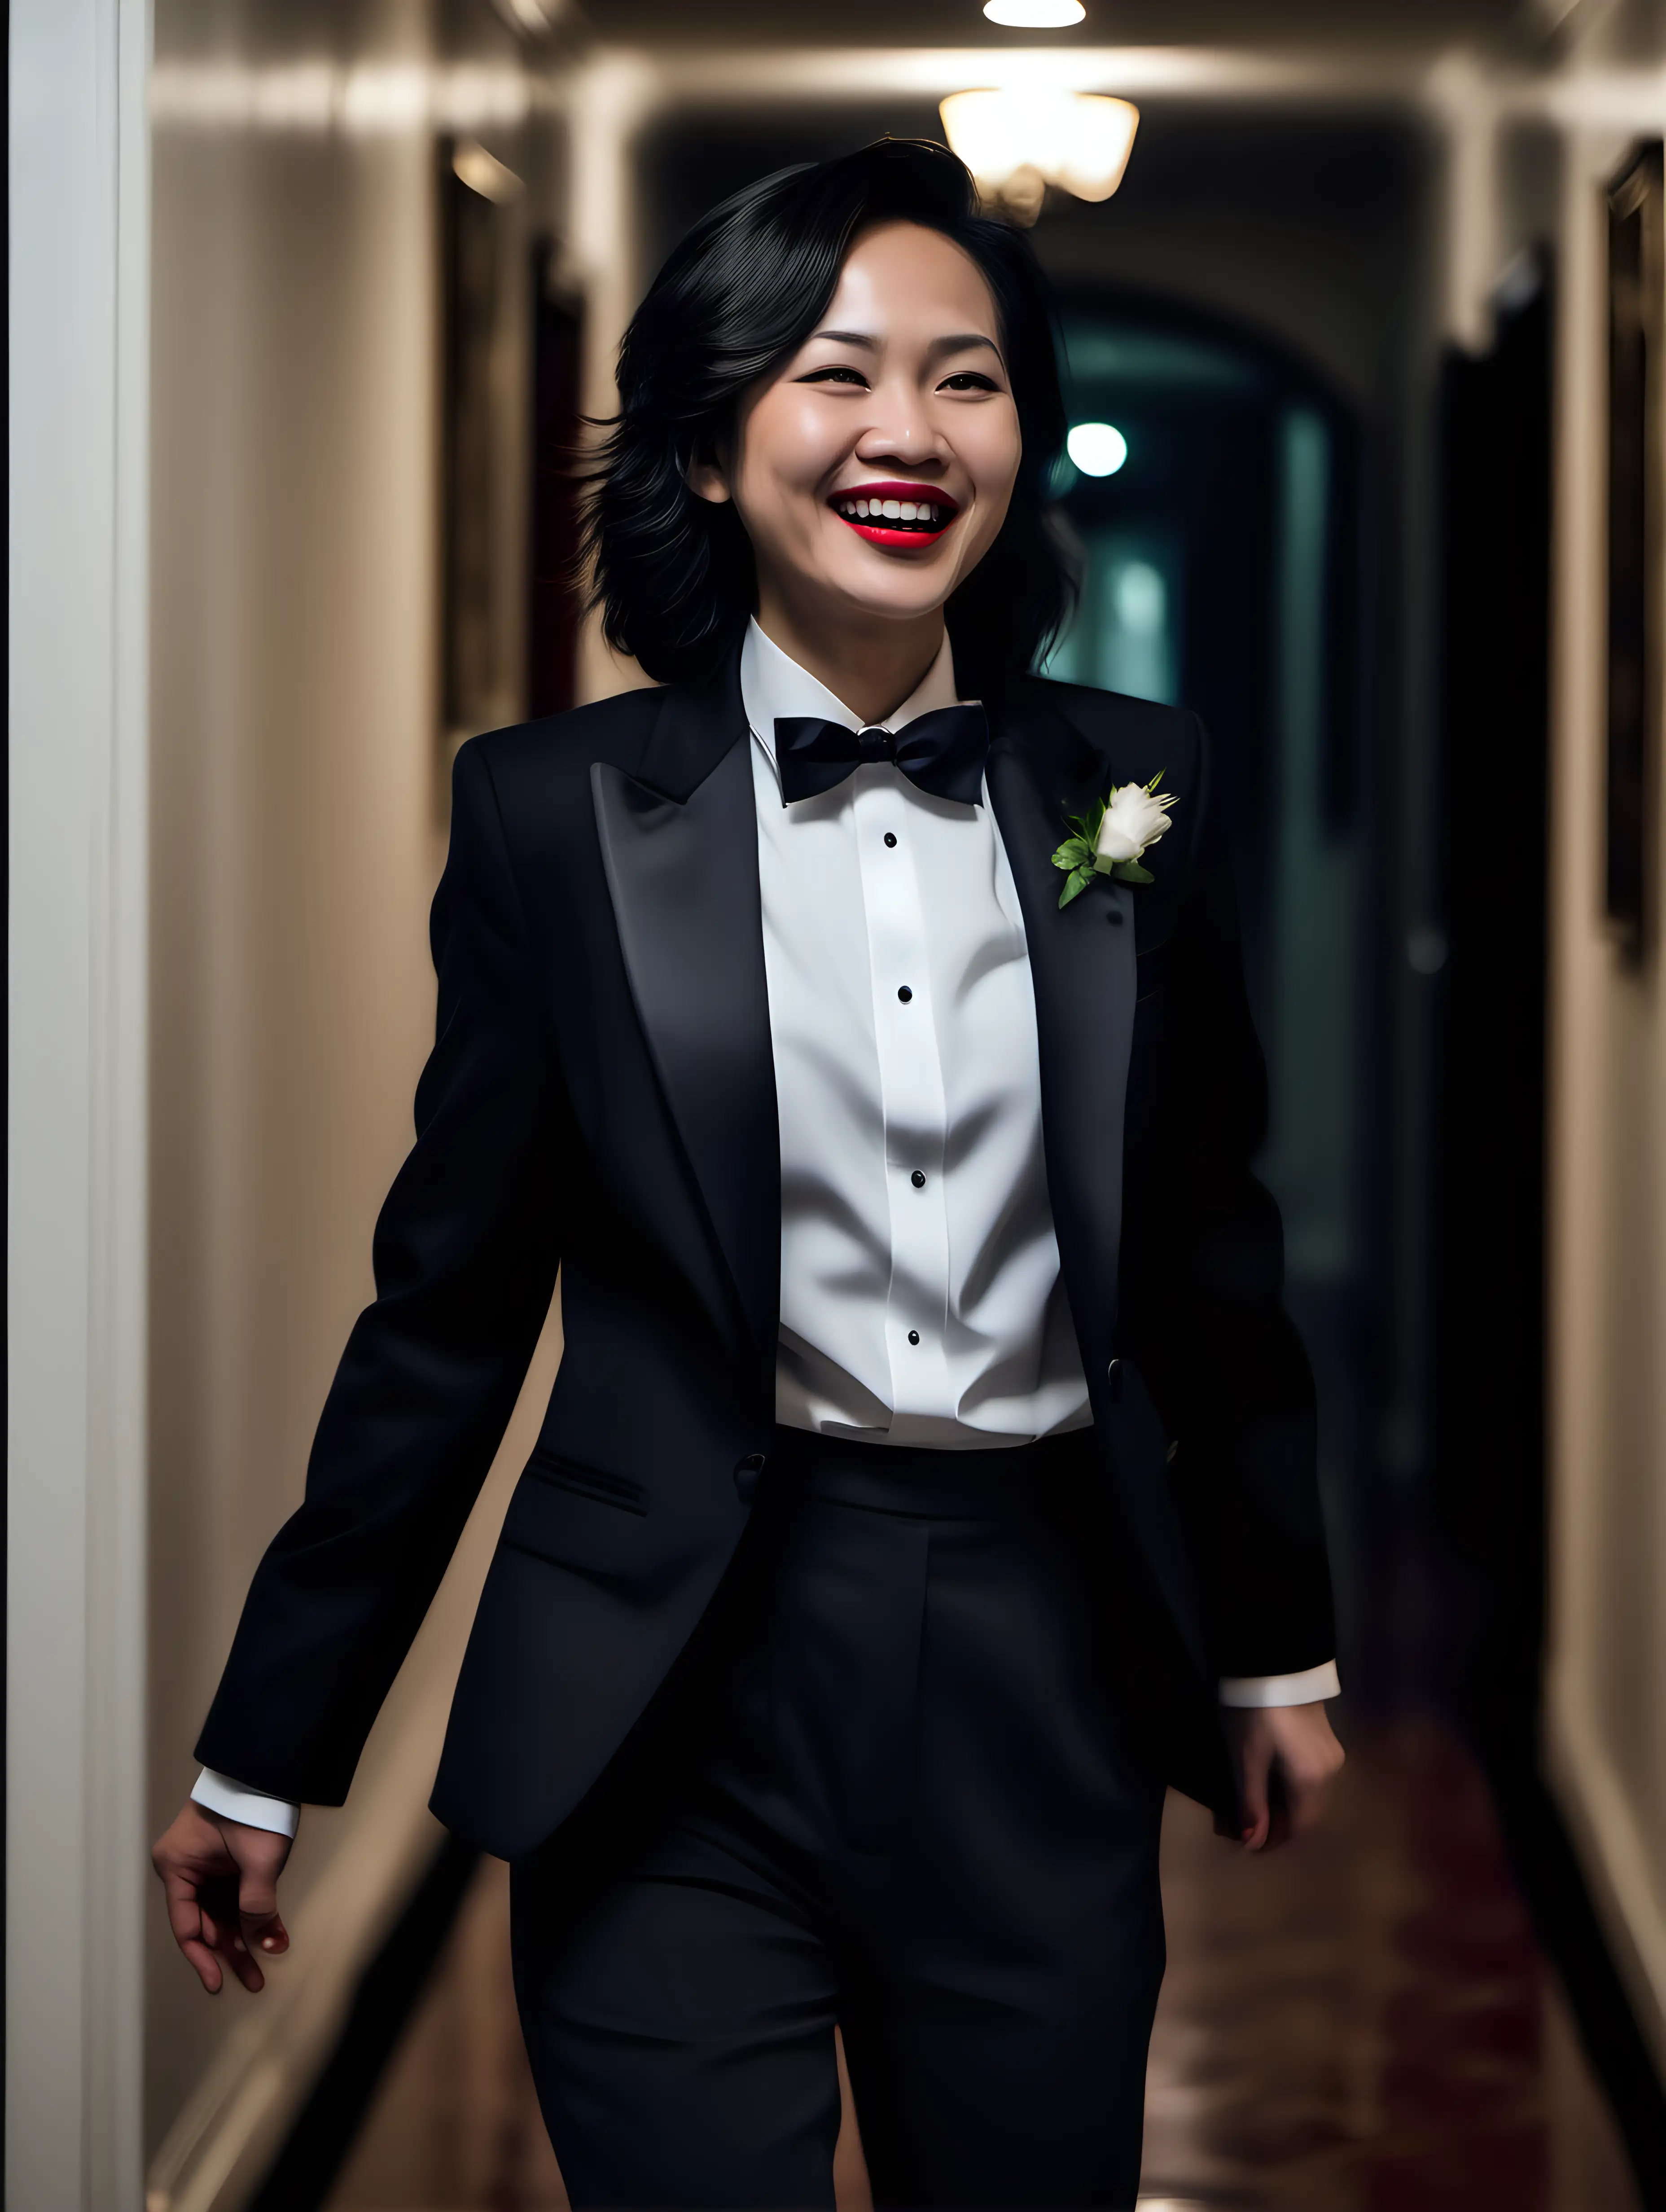 It is night. A smiling and laughing 40 year old Vietnamese woman with shoulder length hair and red lipstick is walking down a dark hallway in a mansion. She is facing forward. She is wearing a tuxedo with a black jacket with a corsage and a white shirt and a black bowtie and black cufflinks and black pants. She is relaxed. Her jacket is open.